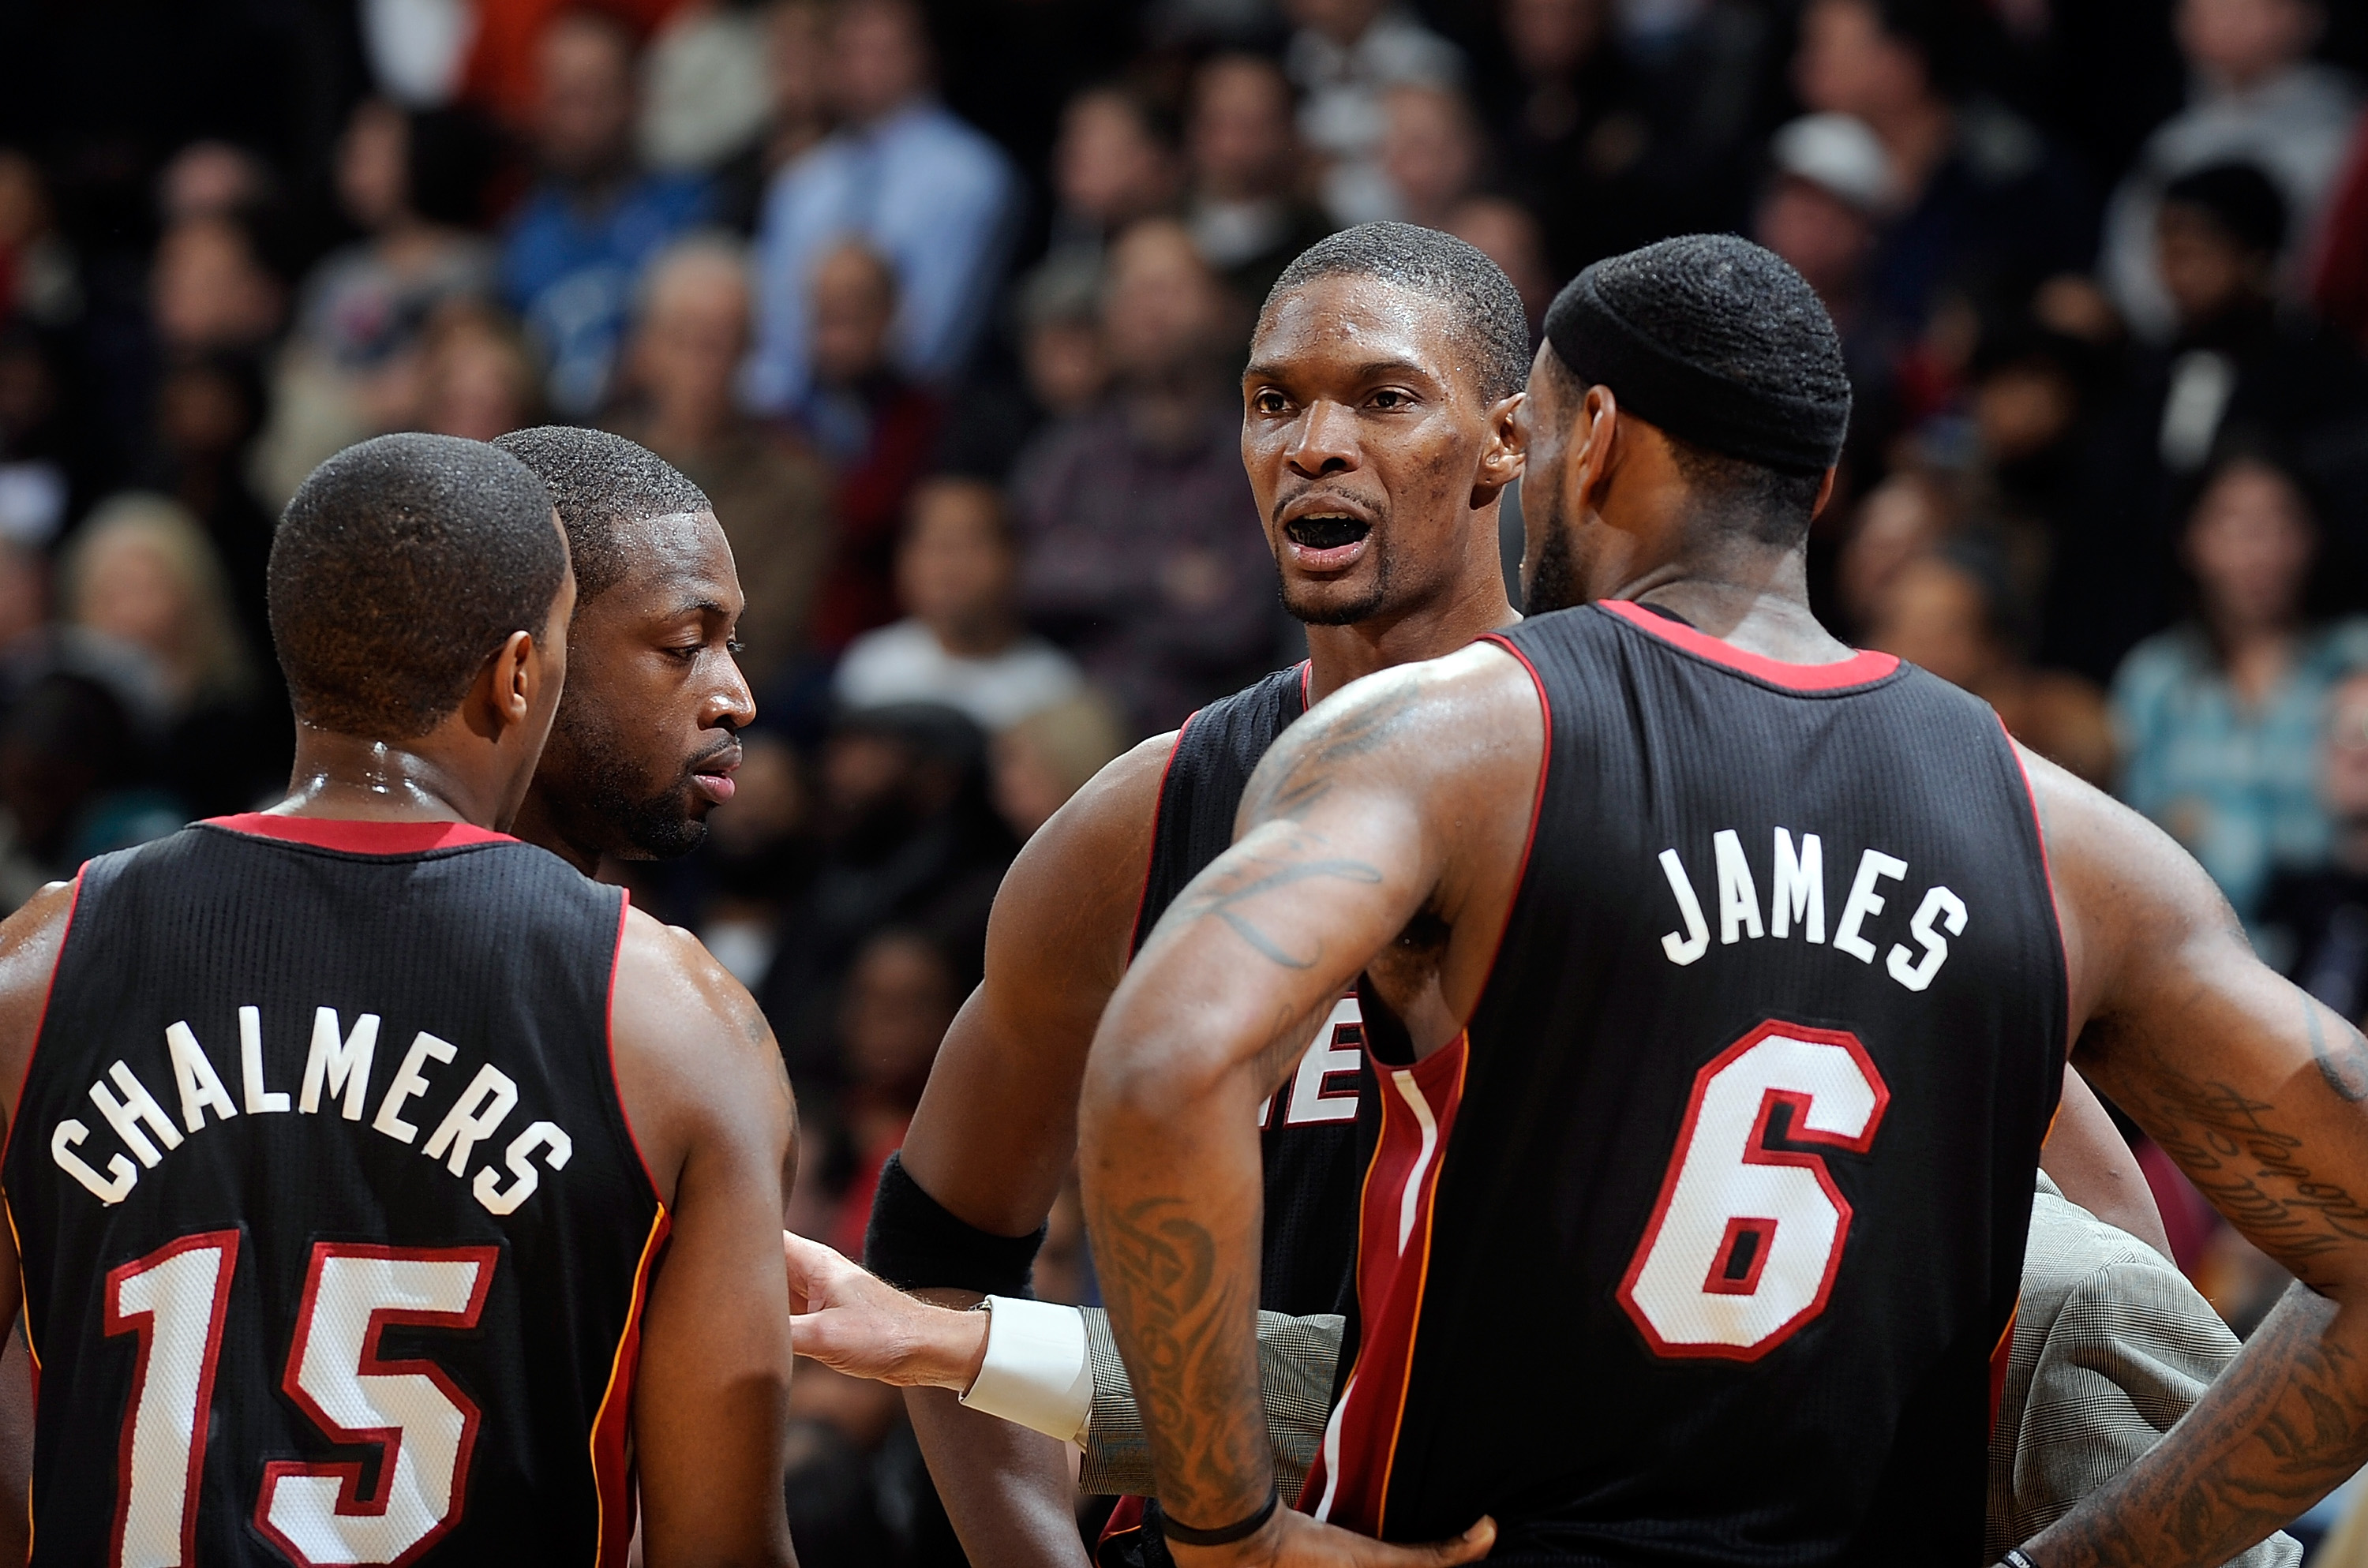 WASHINGTON, DC - DECEMBER 18:  Chris Bosh #1 of the Miami Heat talks with LeBron James #6, Dwyane Wade #3 and Mario Chalmers #15 during the game against the Washington Wizards at the Verizon Center on December 18, 2010 in Washington, DC. NOTE TO USER: Use